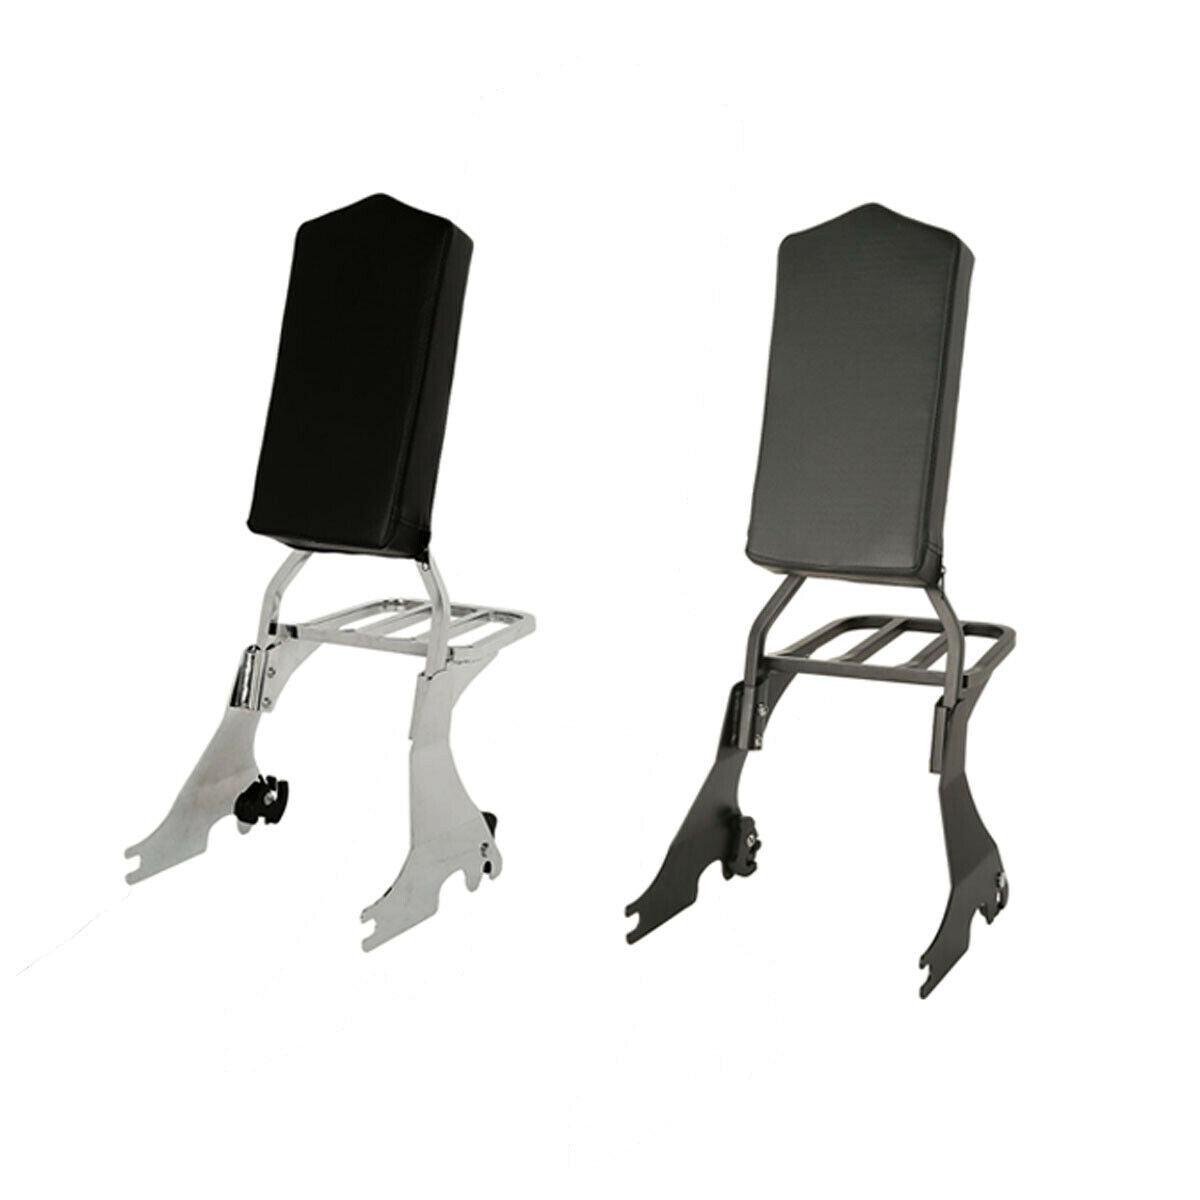 Backrest Sissy Bar Luggage Rack Fit For Harley Sportster 883 1200 48 72 04-21 US - Moto Life Products